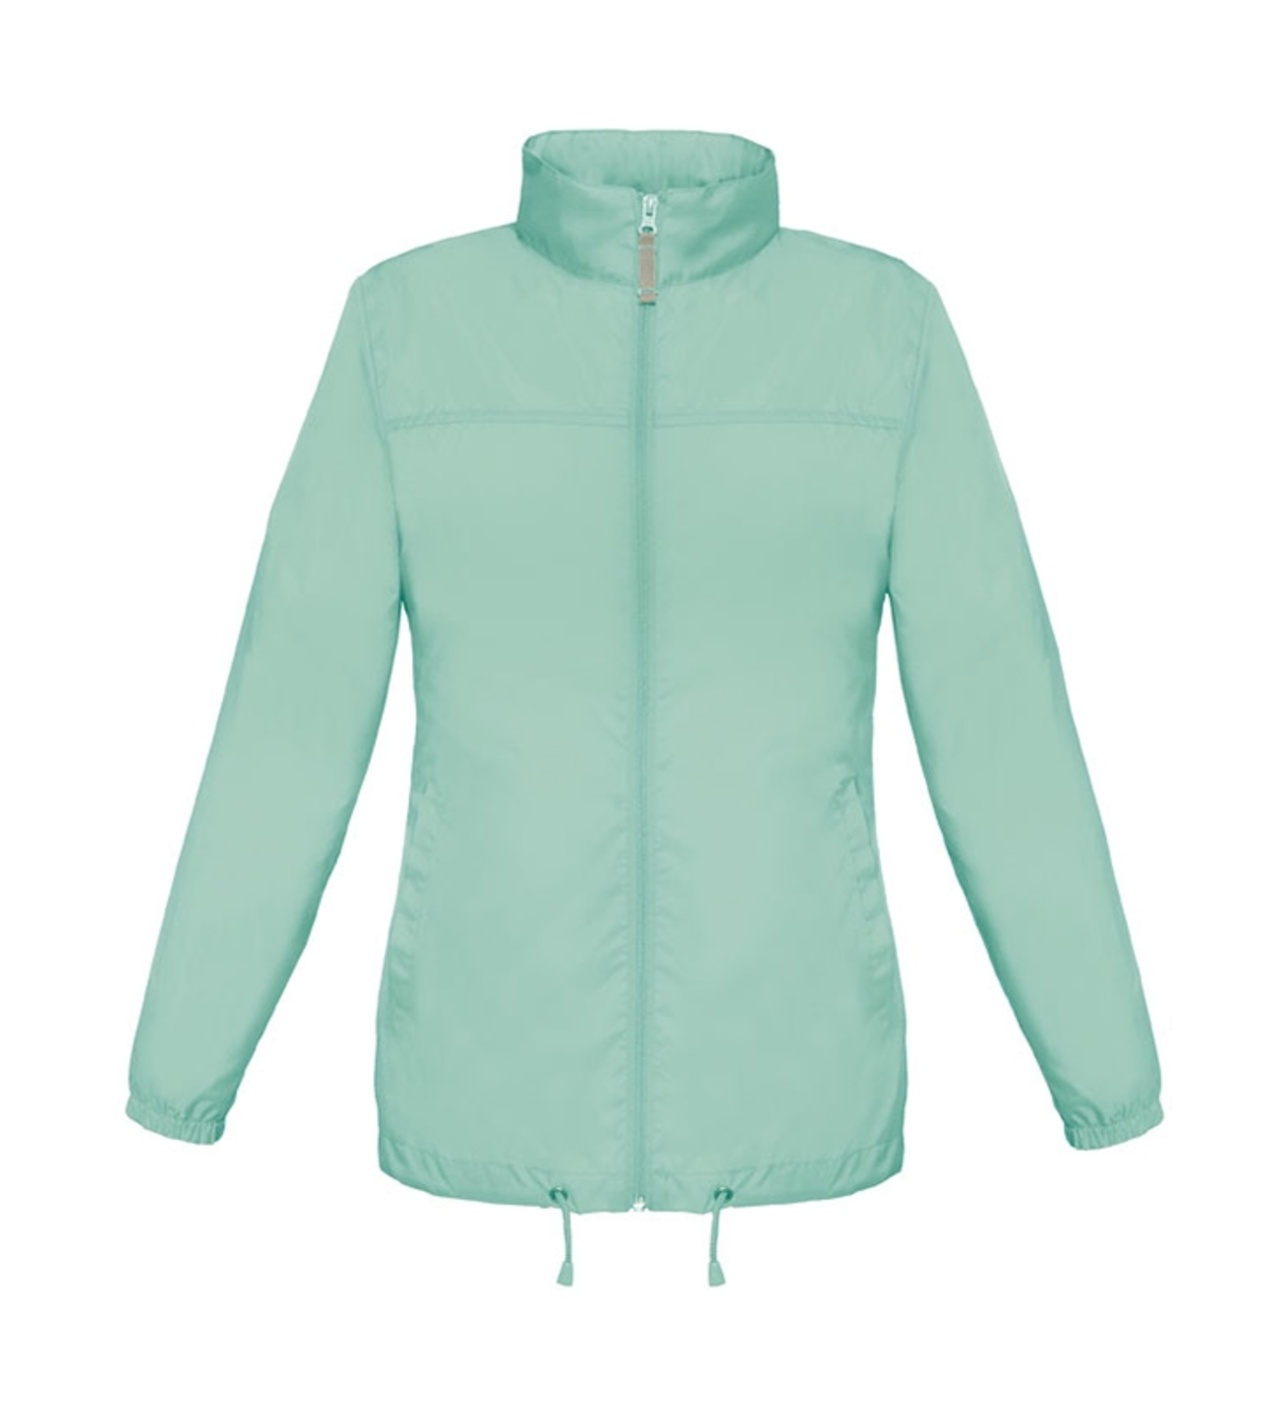 B and C Collection Sirocco Woman - PIXEL TURQUOISE - S